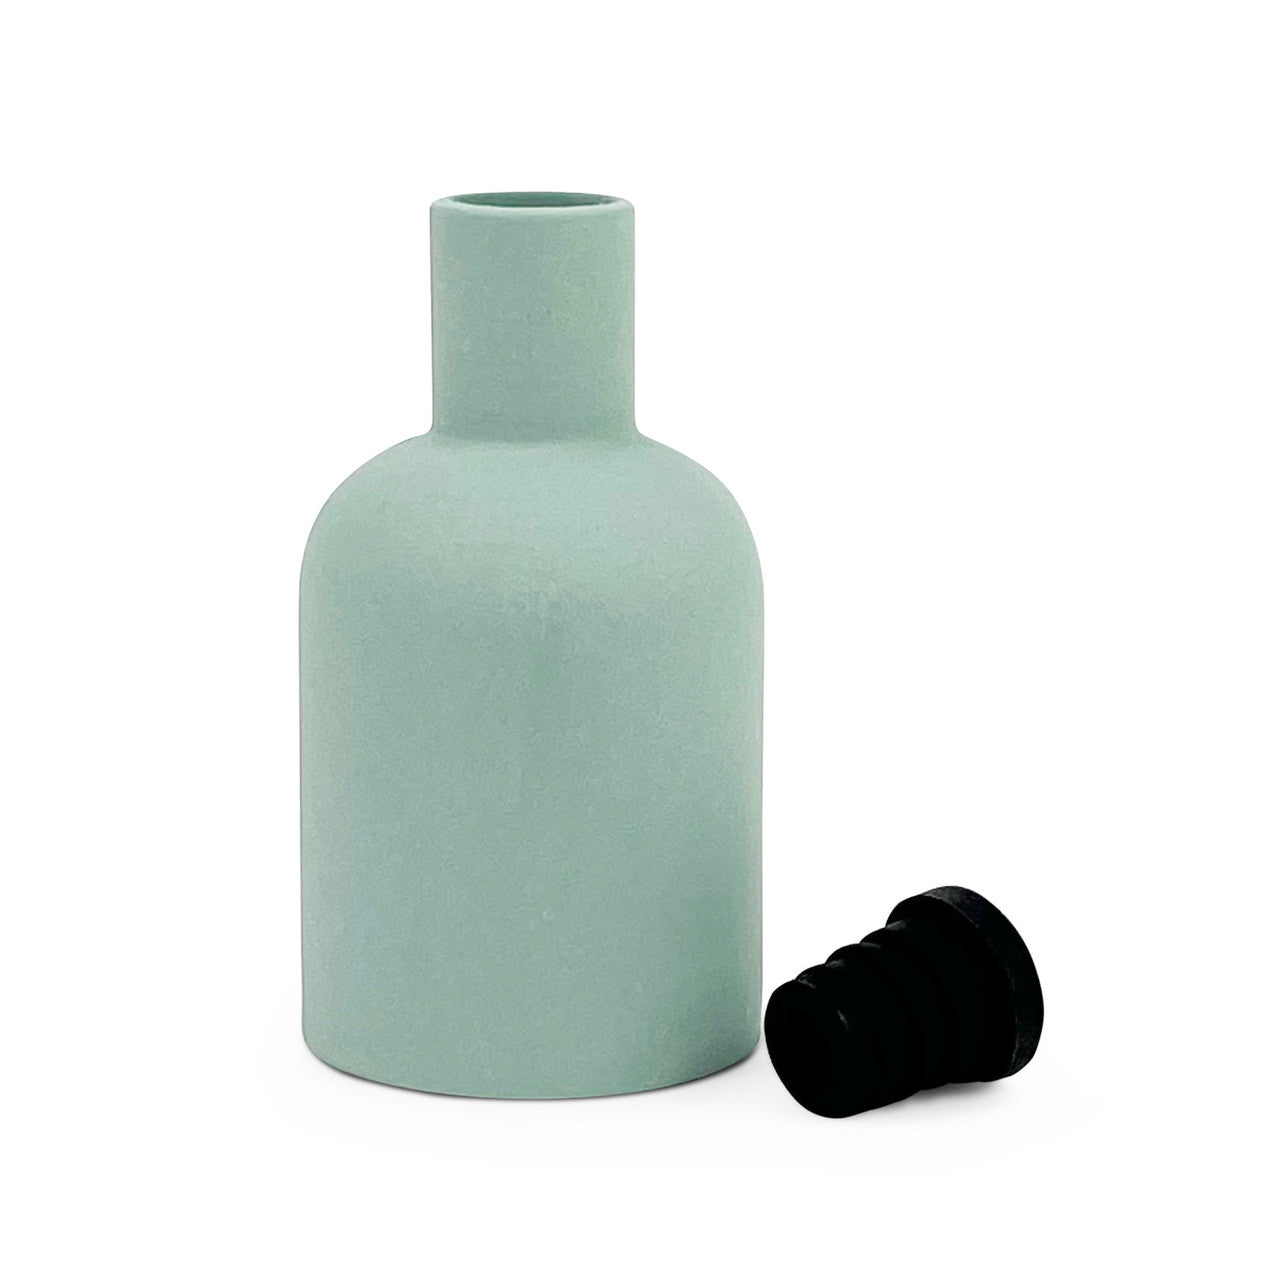 Ceramic Bottle for Diffusers - Sage Green